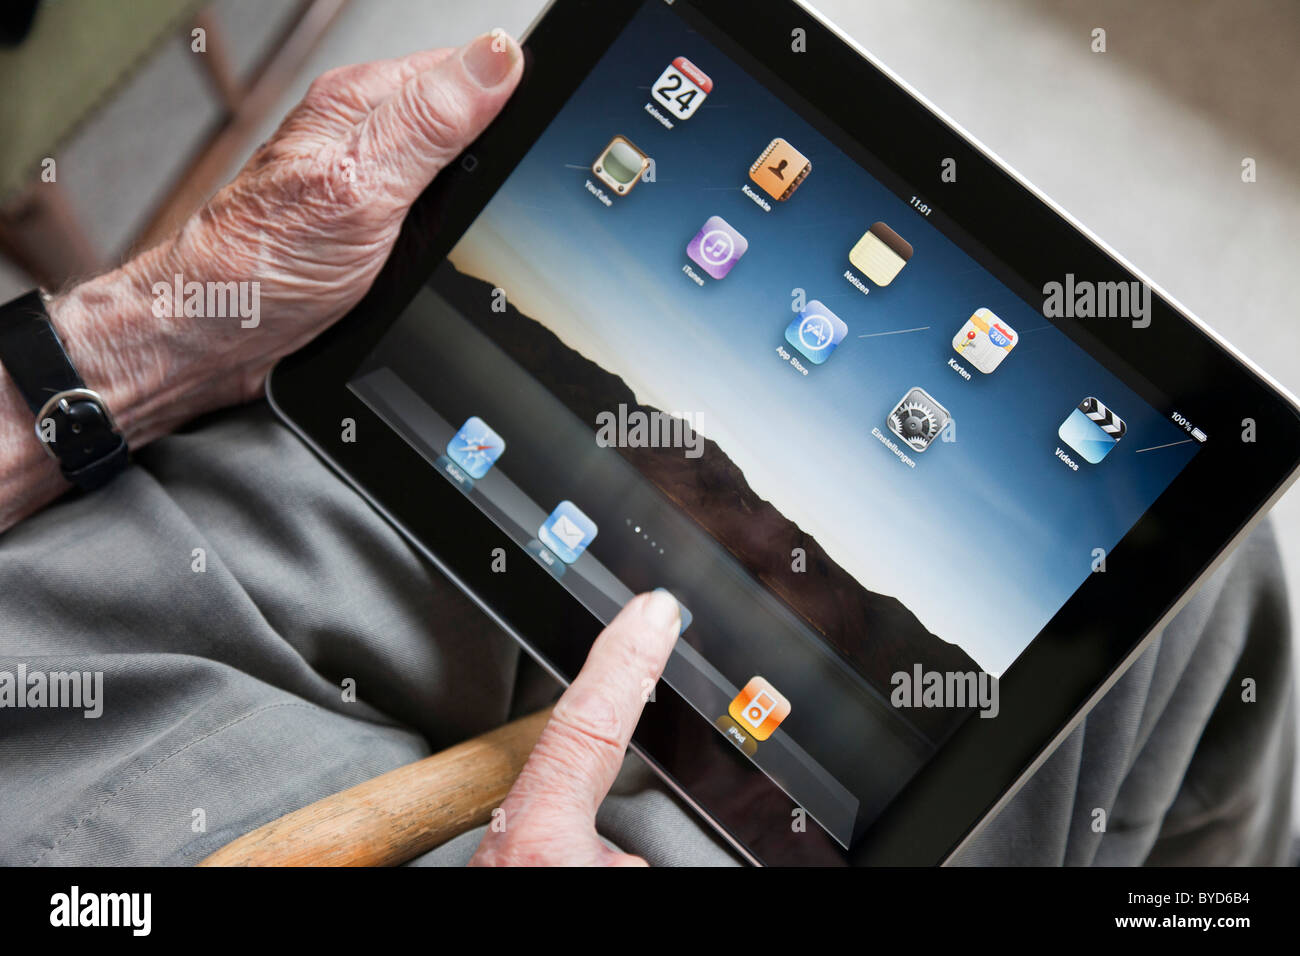 Senior viewing the user interface on an iPad, close-up of his hands Stock Photo